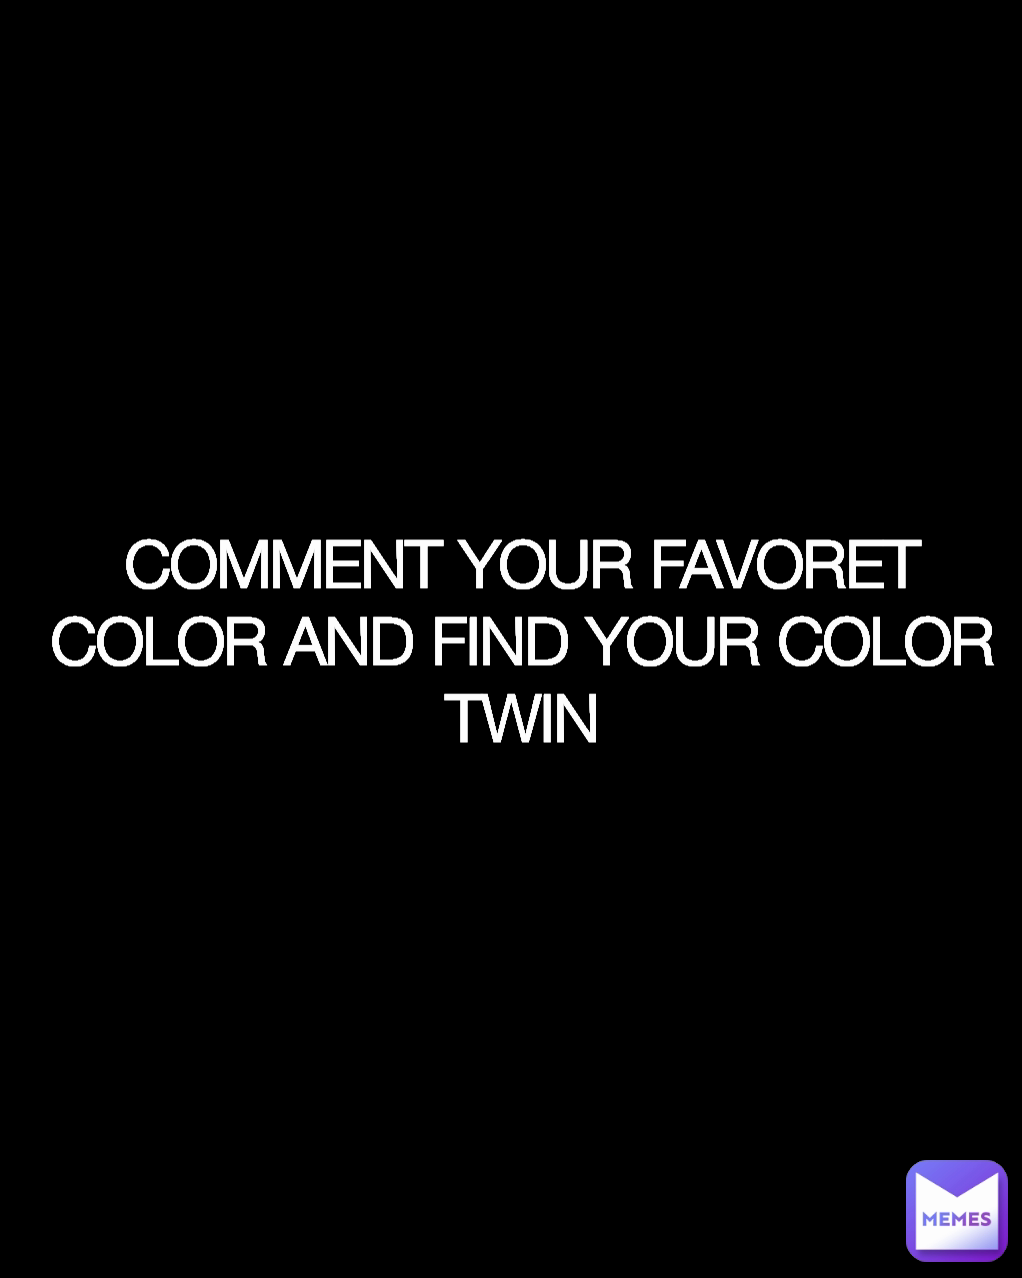 COMMENT YOUR FAVORET COLOR AND FIND YOUR COLOR TWIN